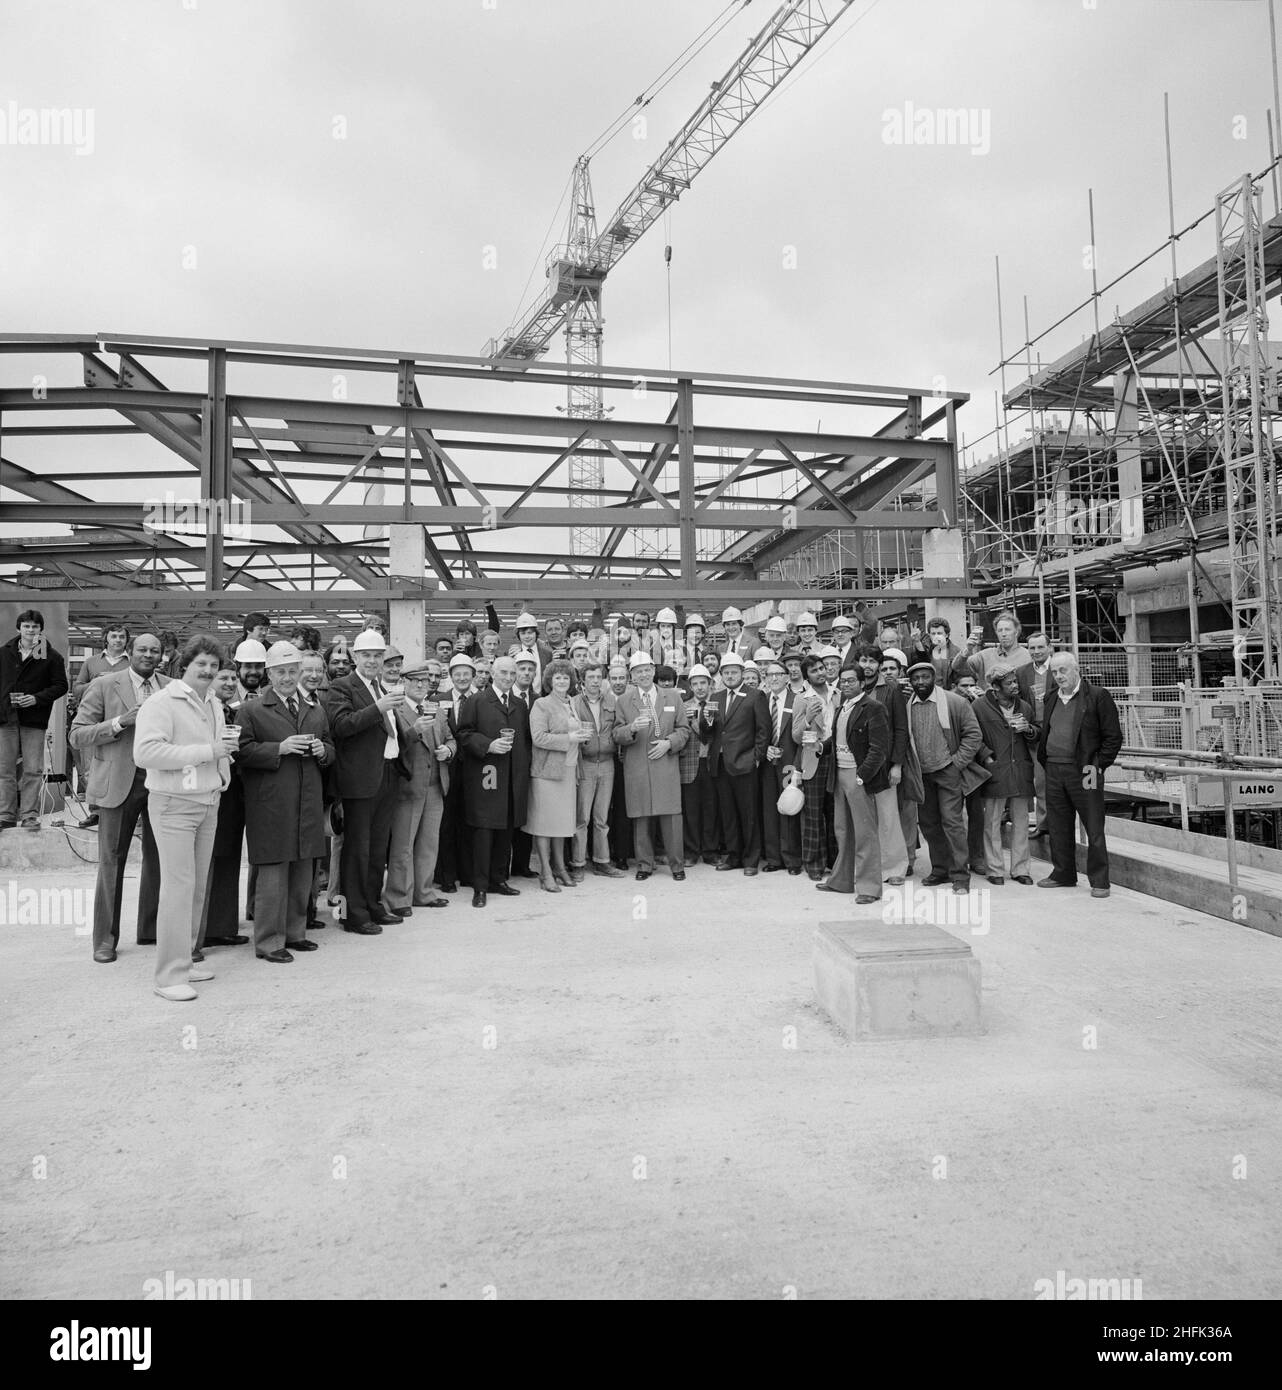 Mayday Hospital, London Road, West Thornton, Croydon, London, 01/05/1981. A group of people posed with celebratory drinks on the roof of the services block at Mayday Hospital during the topping out ceremony. Laing&#x2019;s Southern Region was awarded the contract for the first phase of a multi-million pound five phase redevelopment project at Mayday Hospital. The contract included a new three storey surgical block with a linked service block, which was to be connected to the main hospital complex by bridge. The topping out of the services block at Mayday Hospital was aptly held on May Day. Dur Stock Photo